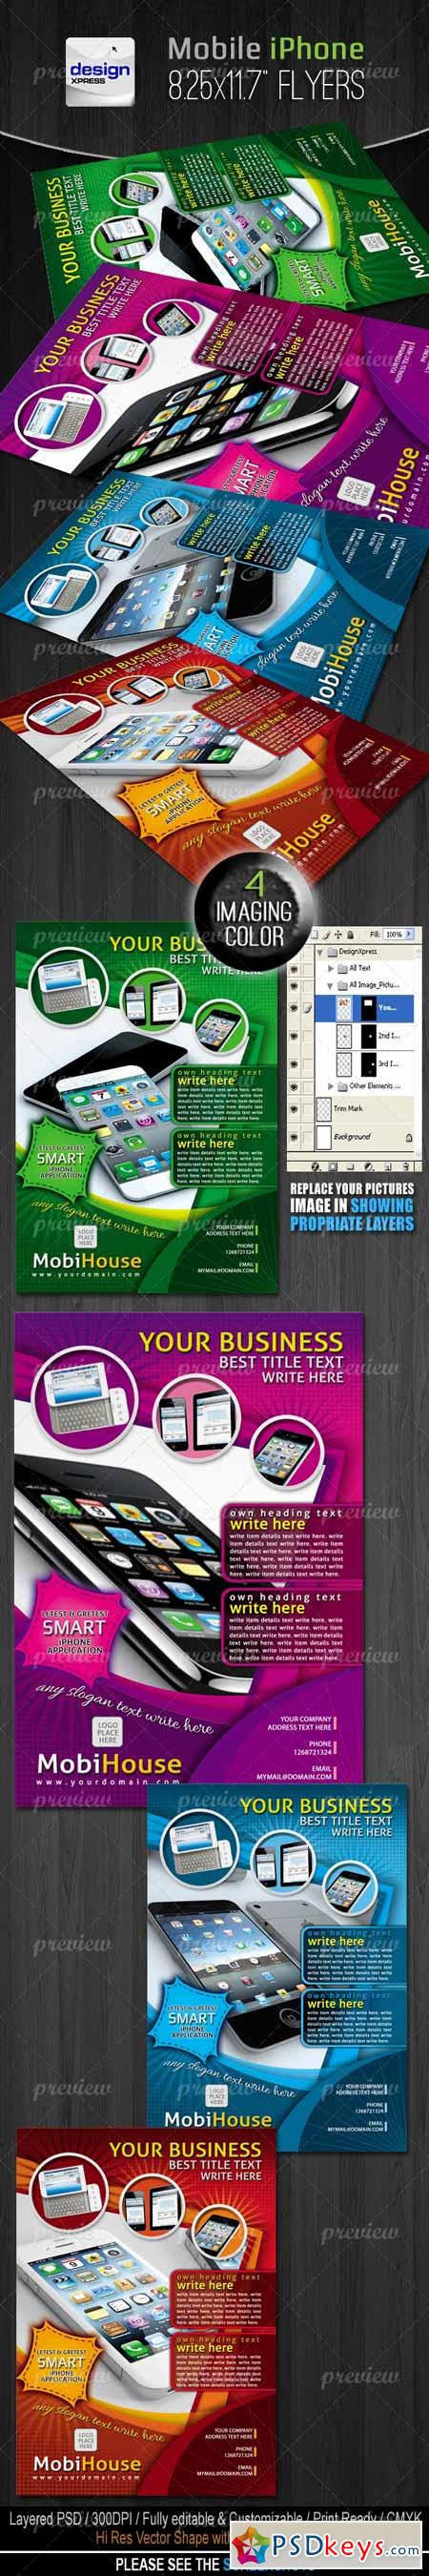 Mobile iPhone Application Flyers Adds 3070